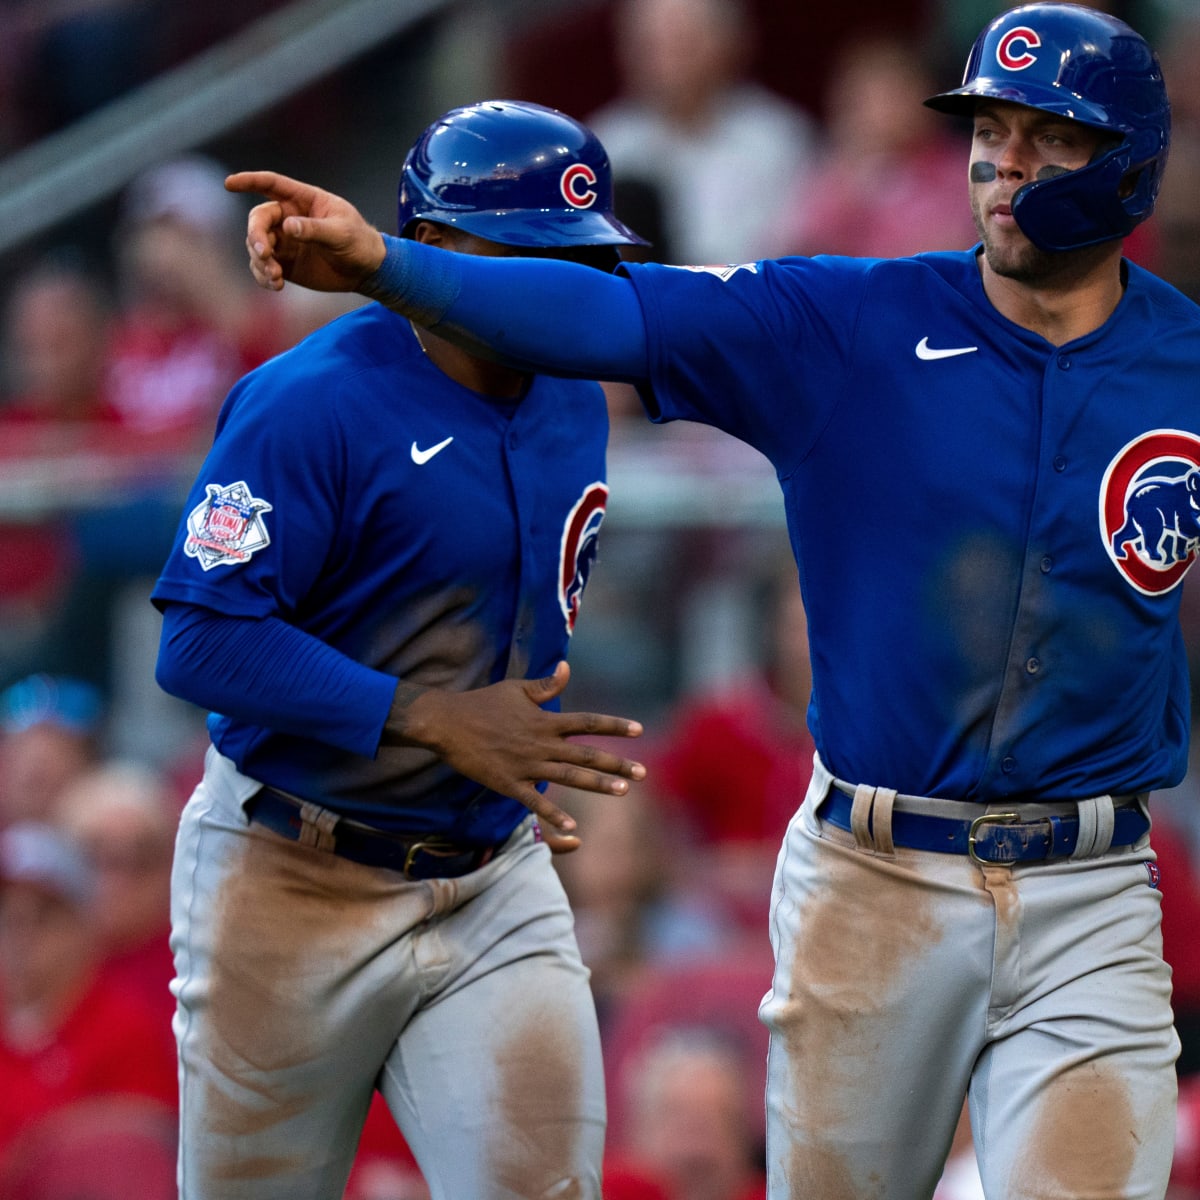 Cubs' Nico Hoerner continues quiet ascent as final month of rebuilding  season winds down - Chicago Sun-Times